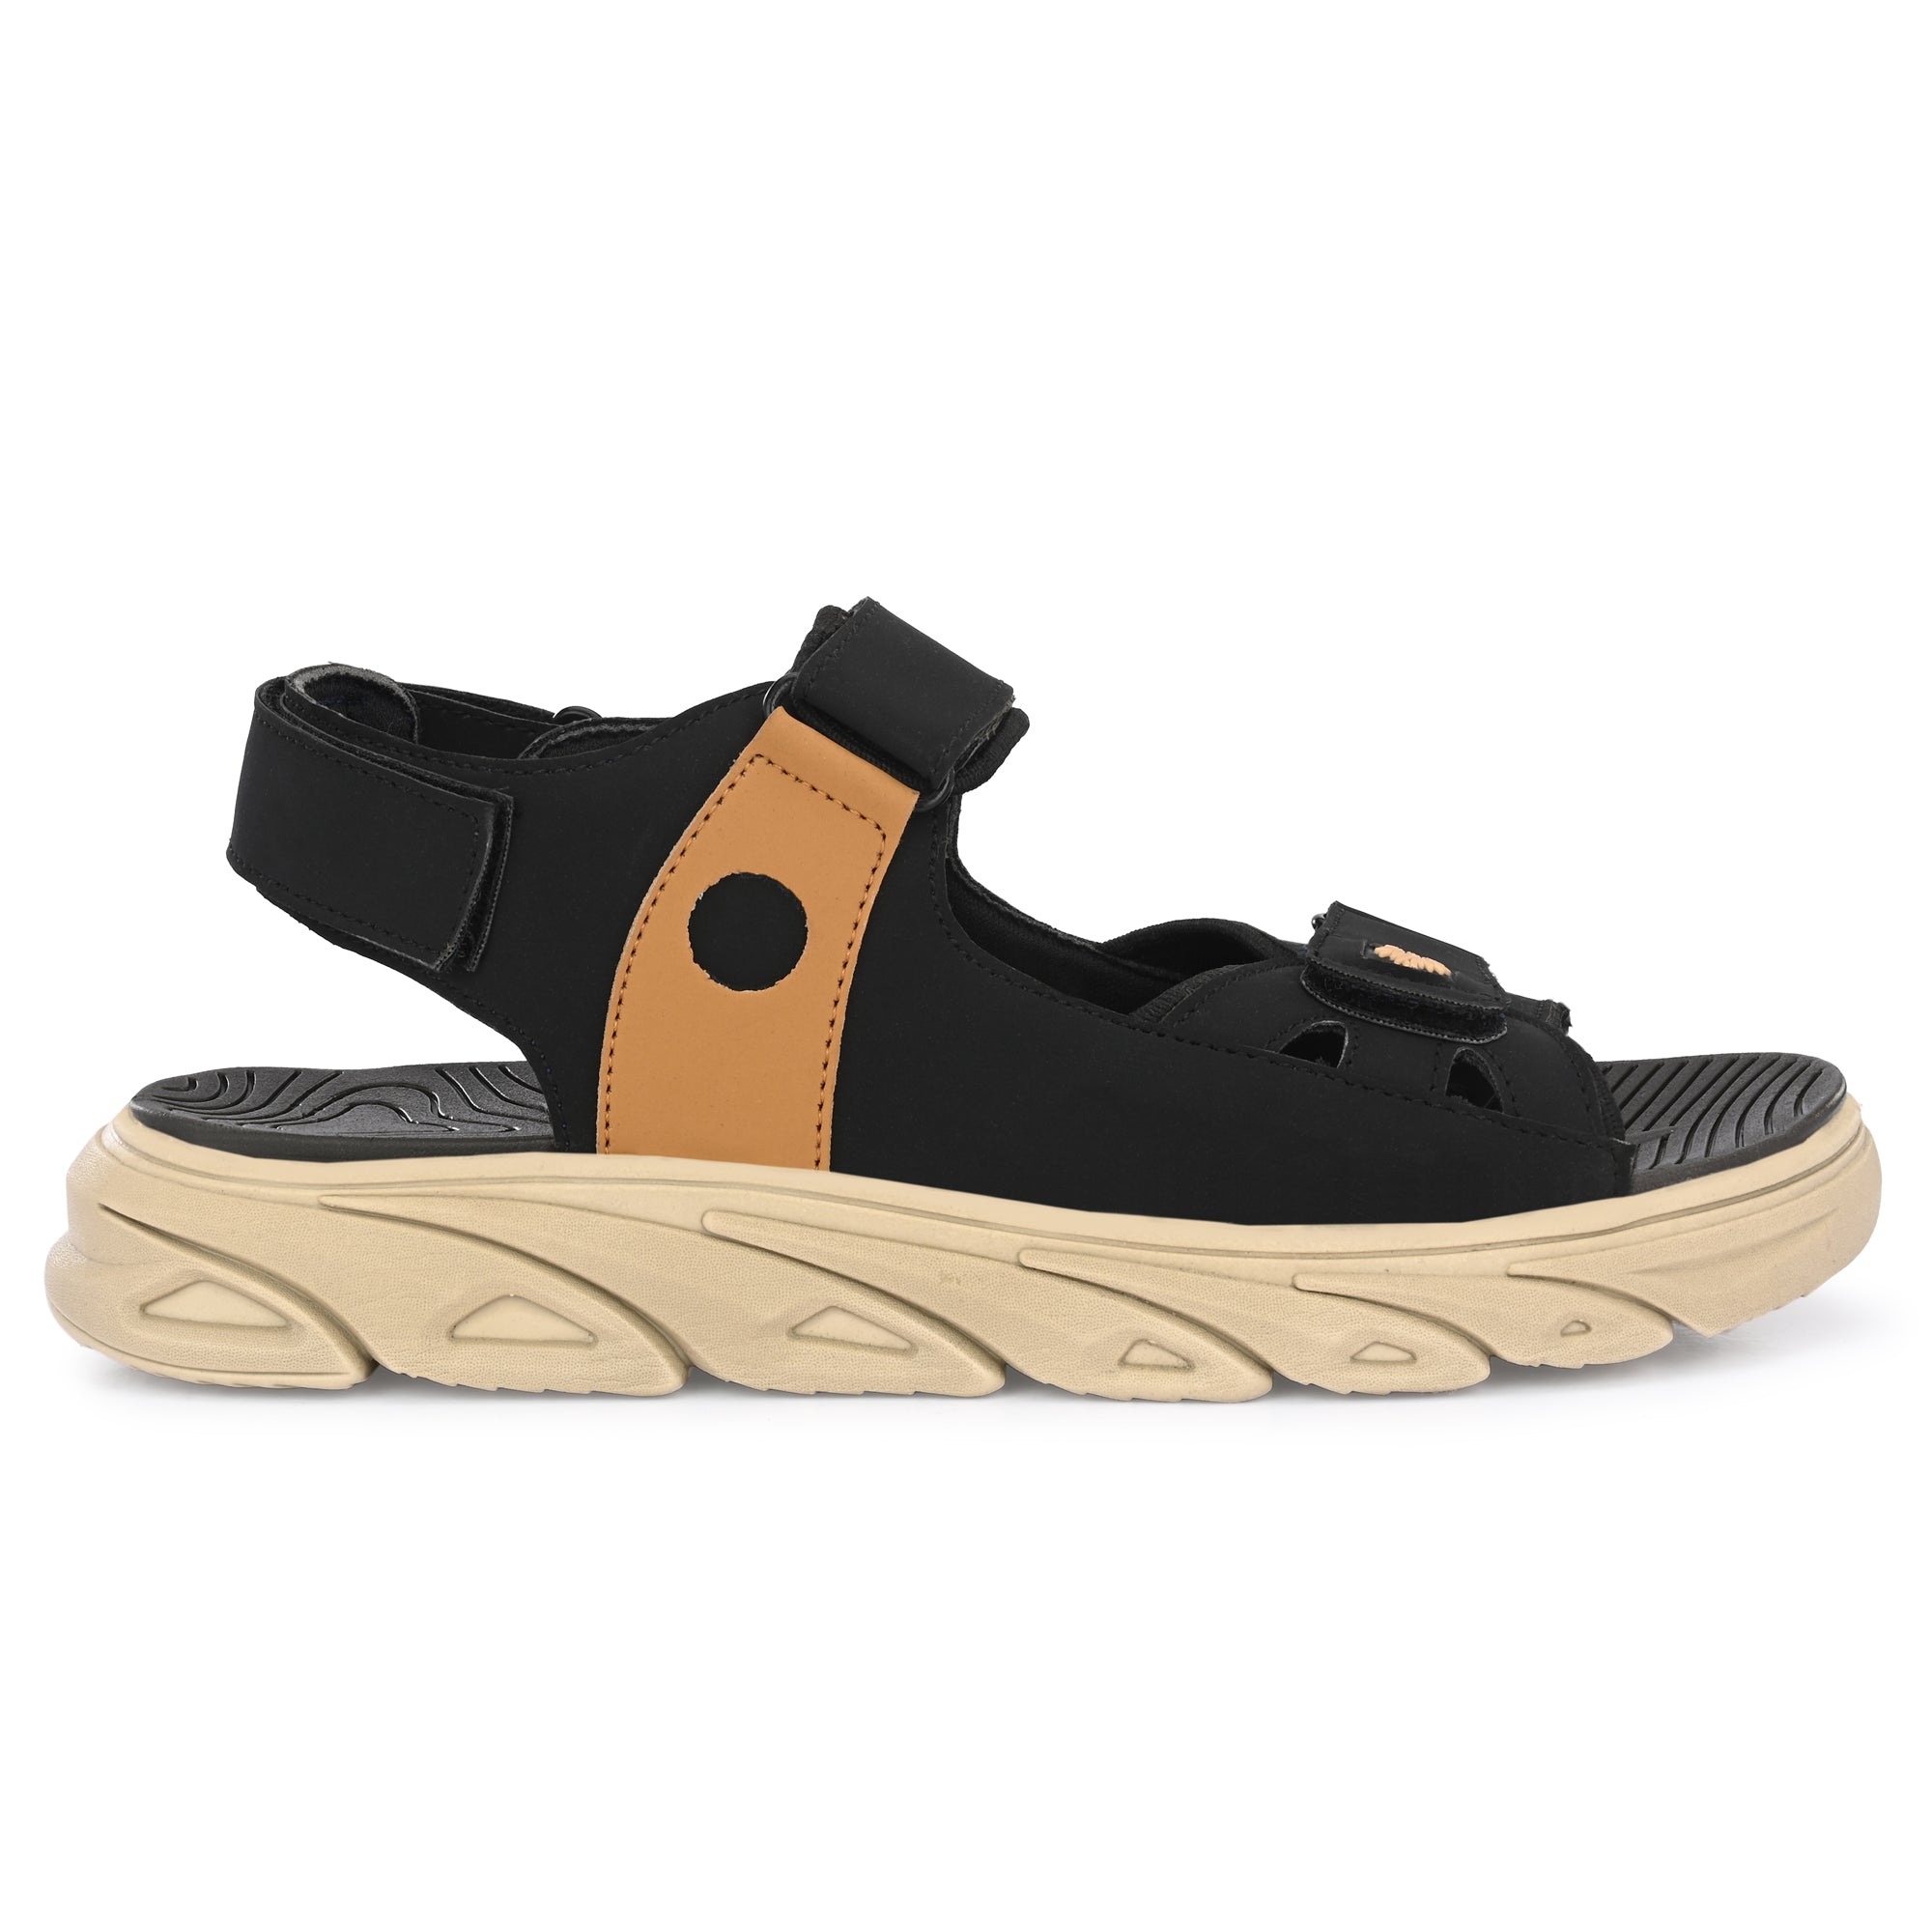 Buy CLARKS Black Leather Slip On Womens Casual Sandals | Shoppers Stop